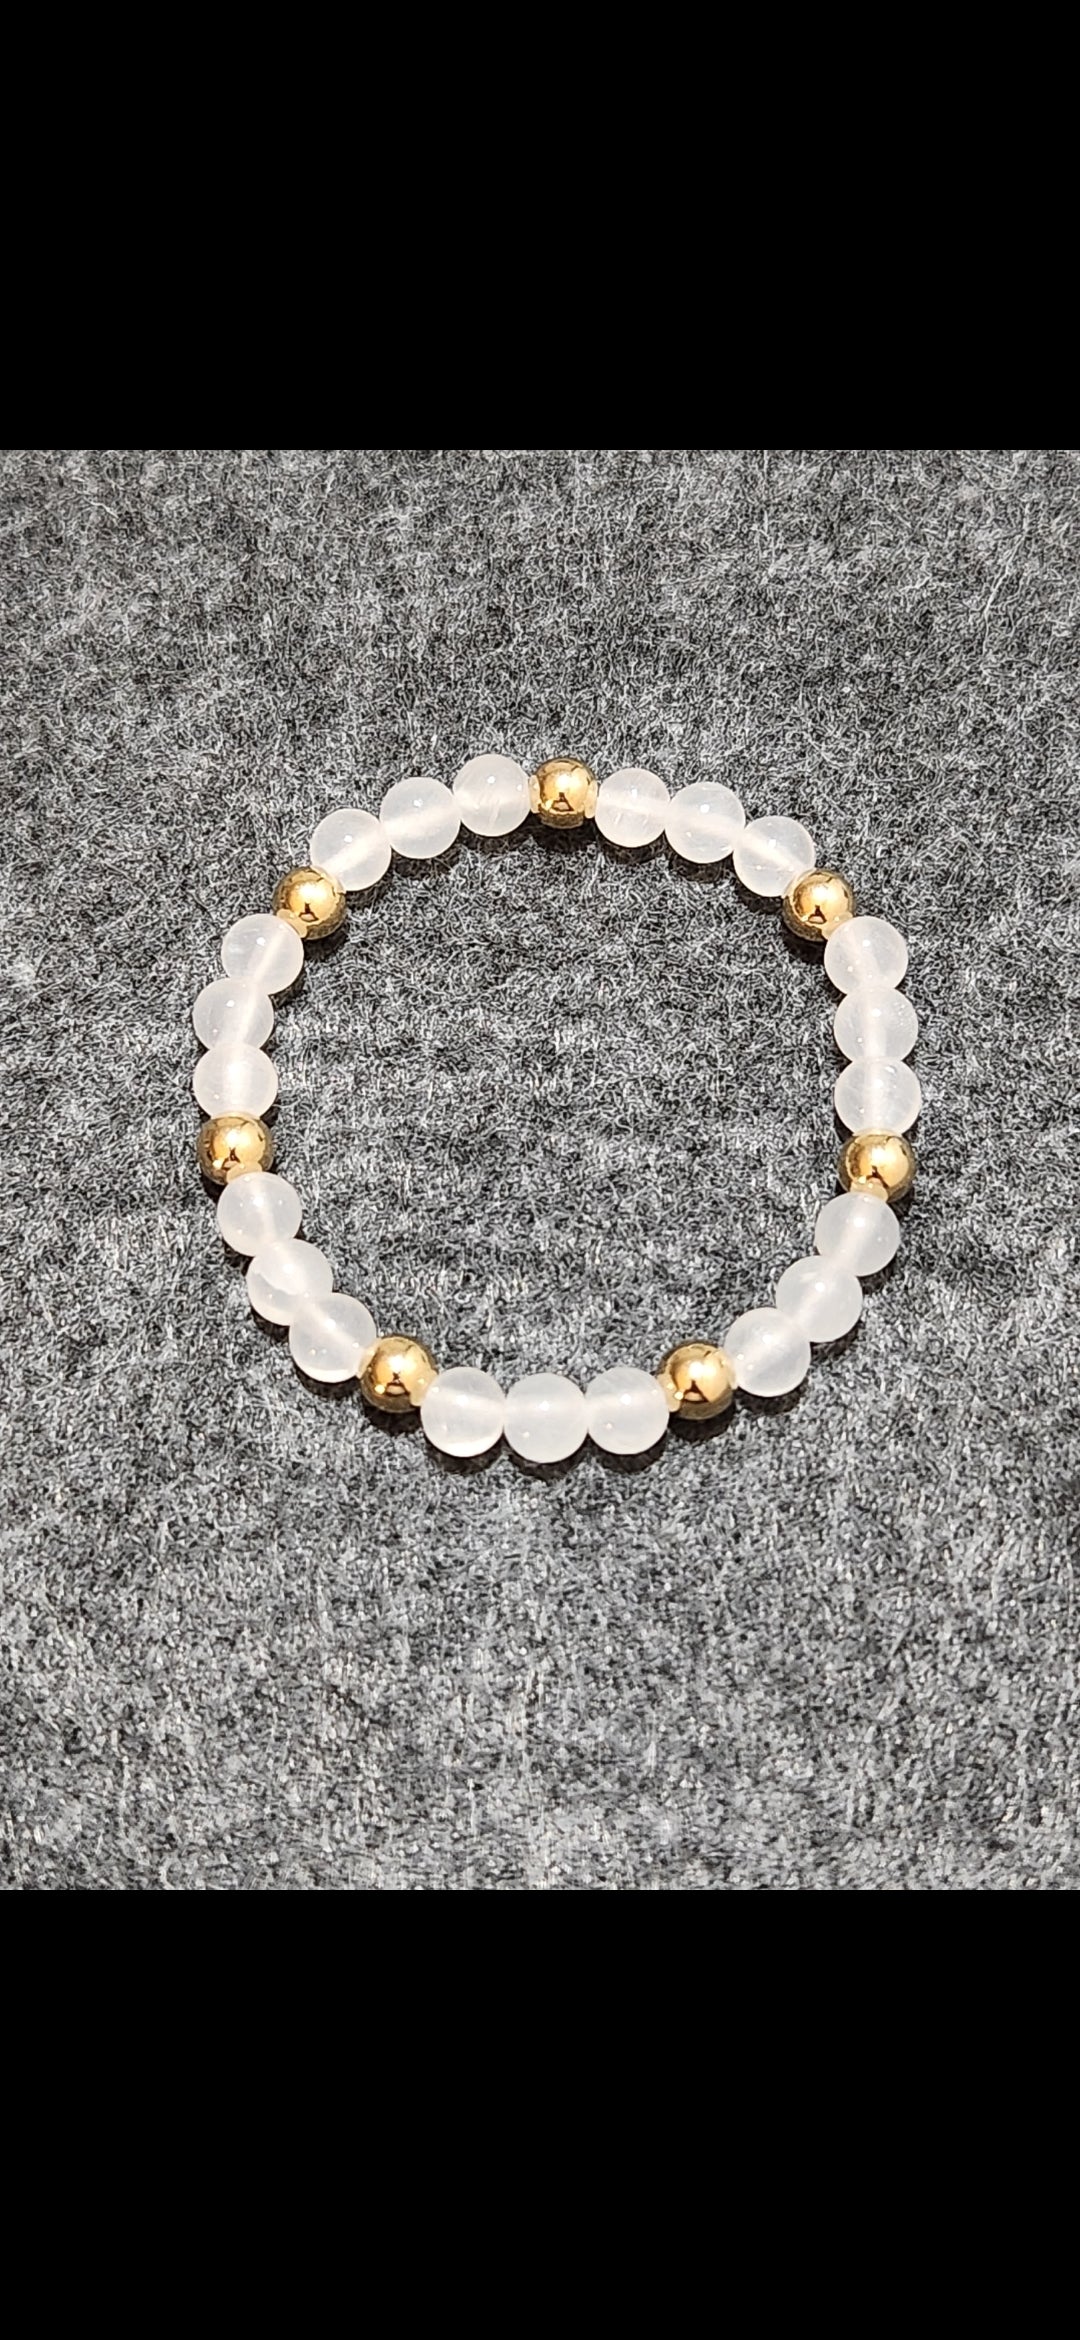 Selenite Stone beaded bracelet with accent beads - clarity - protection - peace - sleep